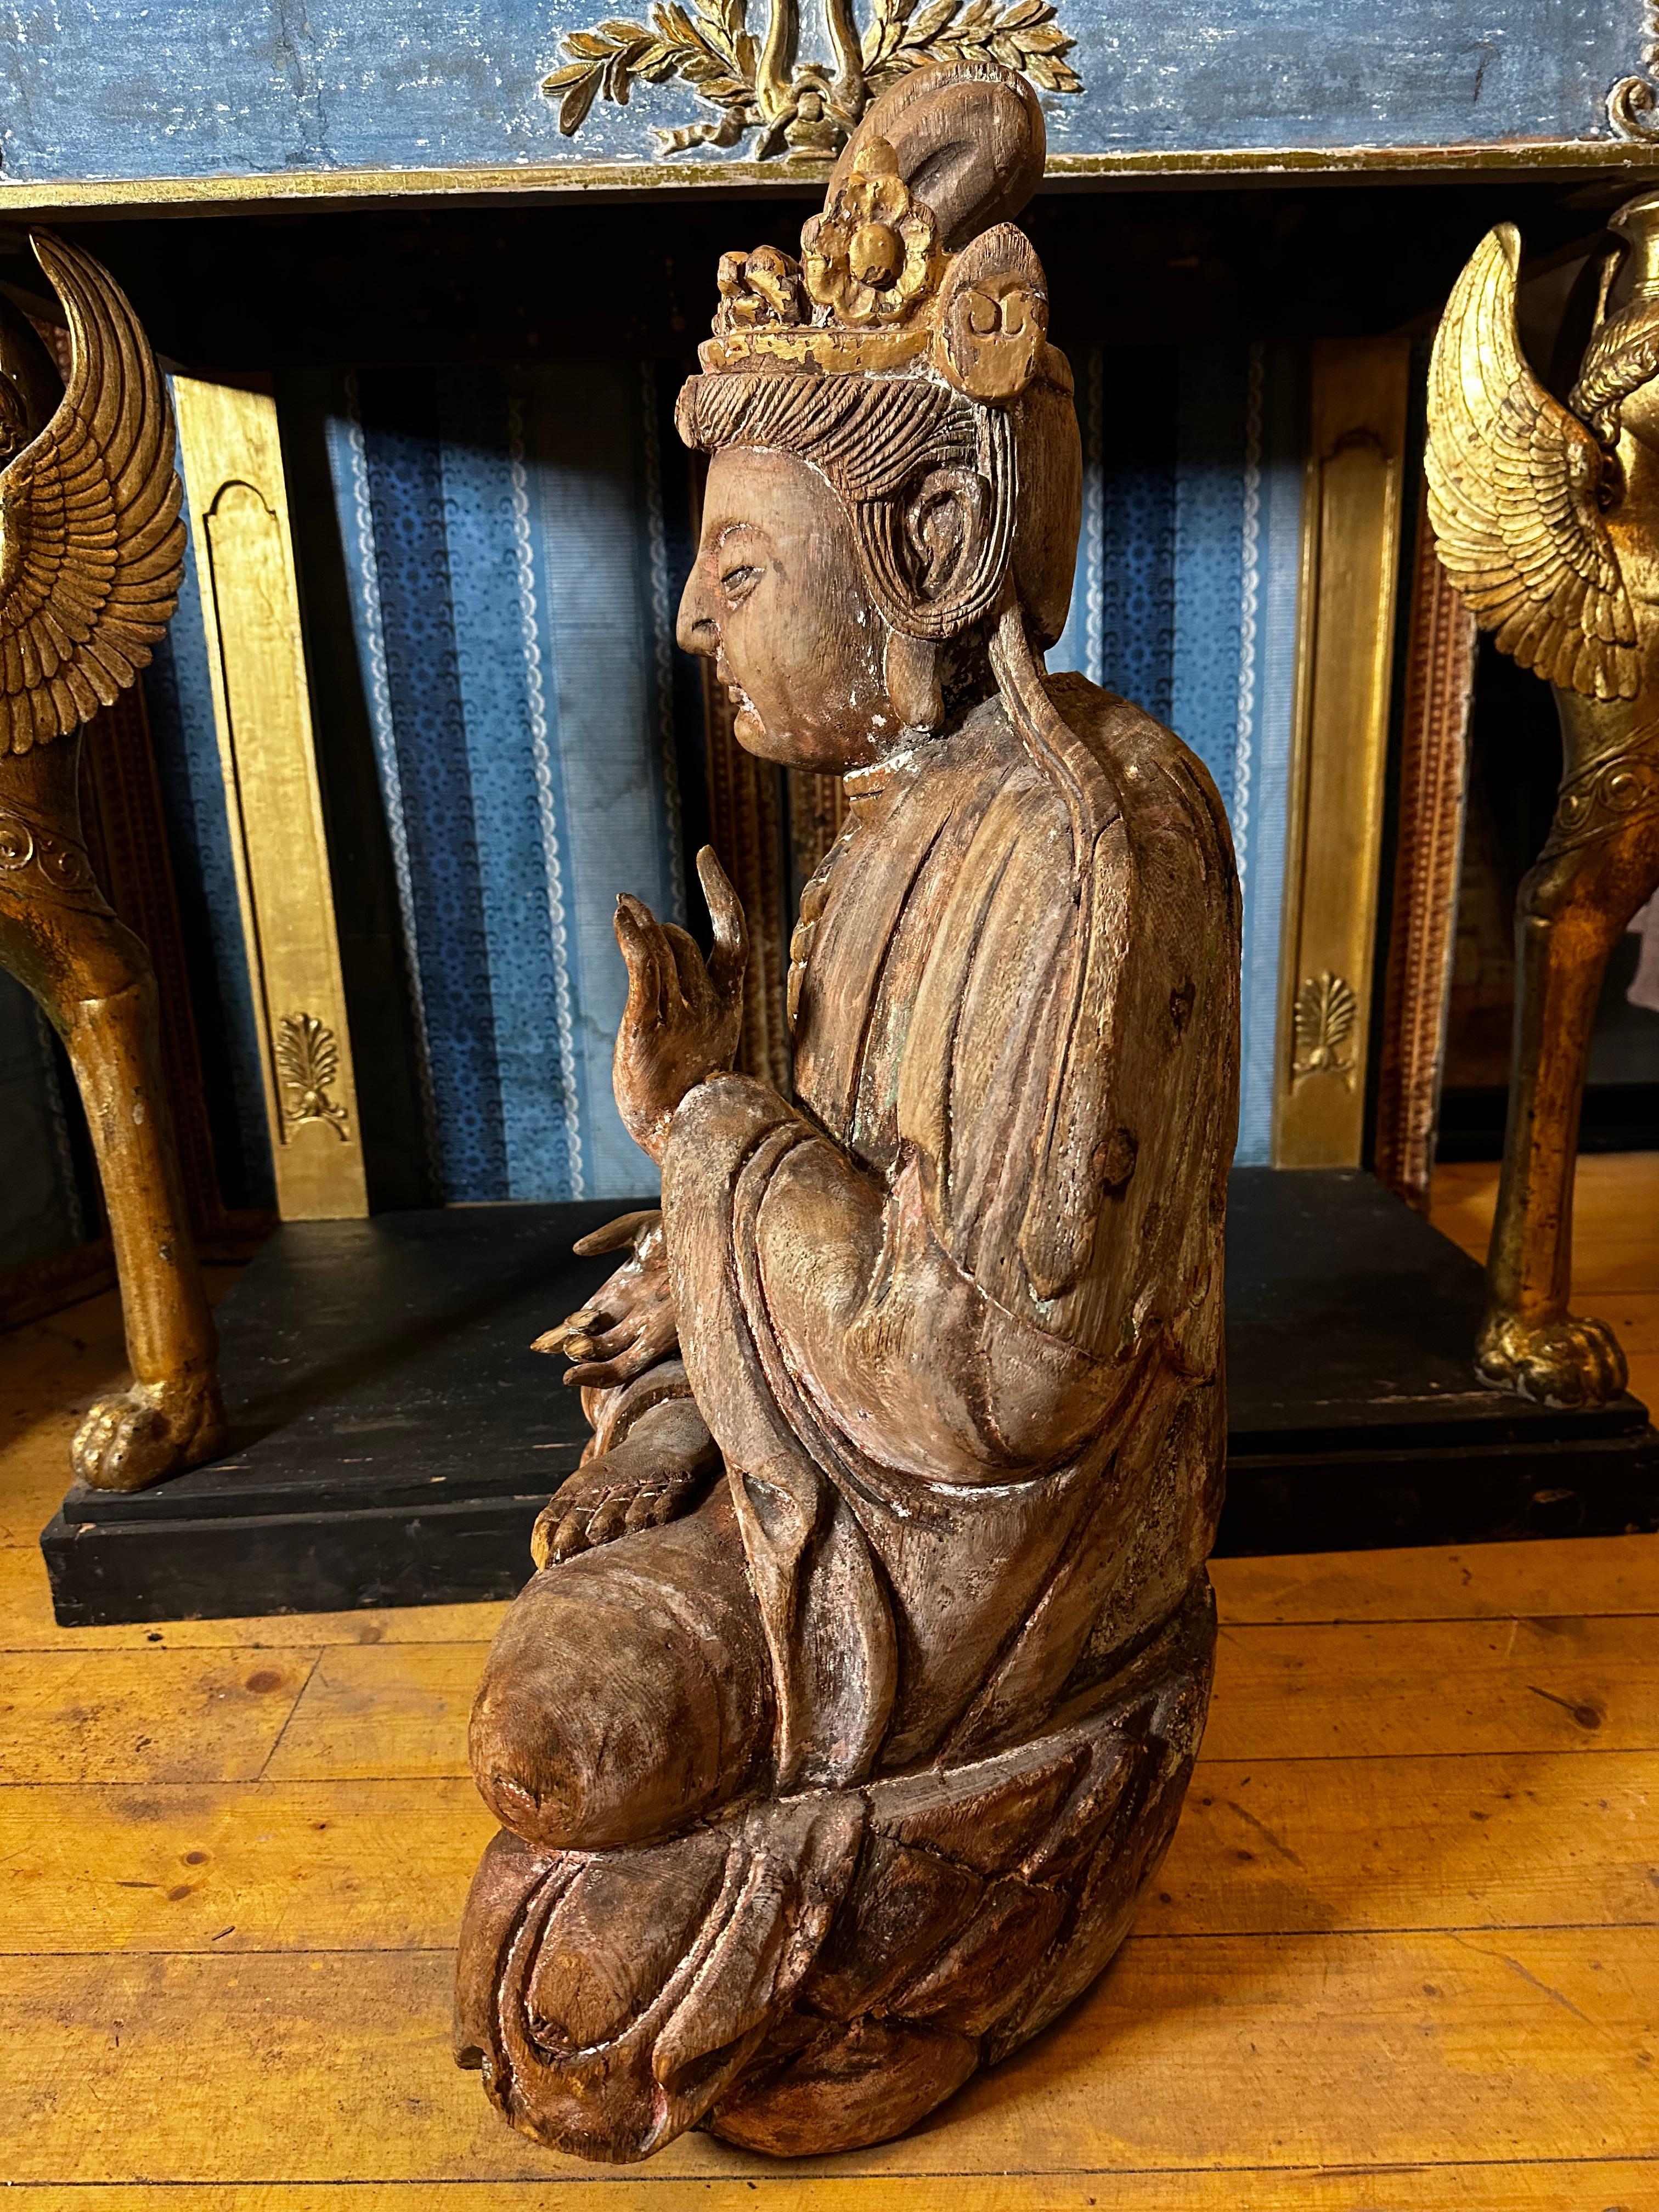 Bodhisattva, a religious sculpture, probably made in India 1750-1850.
The sculpture has been painted and gilded, but with very little remains.

Bodhisattva, in Buddhism, is one who seeks awakening, an individual on the path to becoming a Buddha.